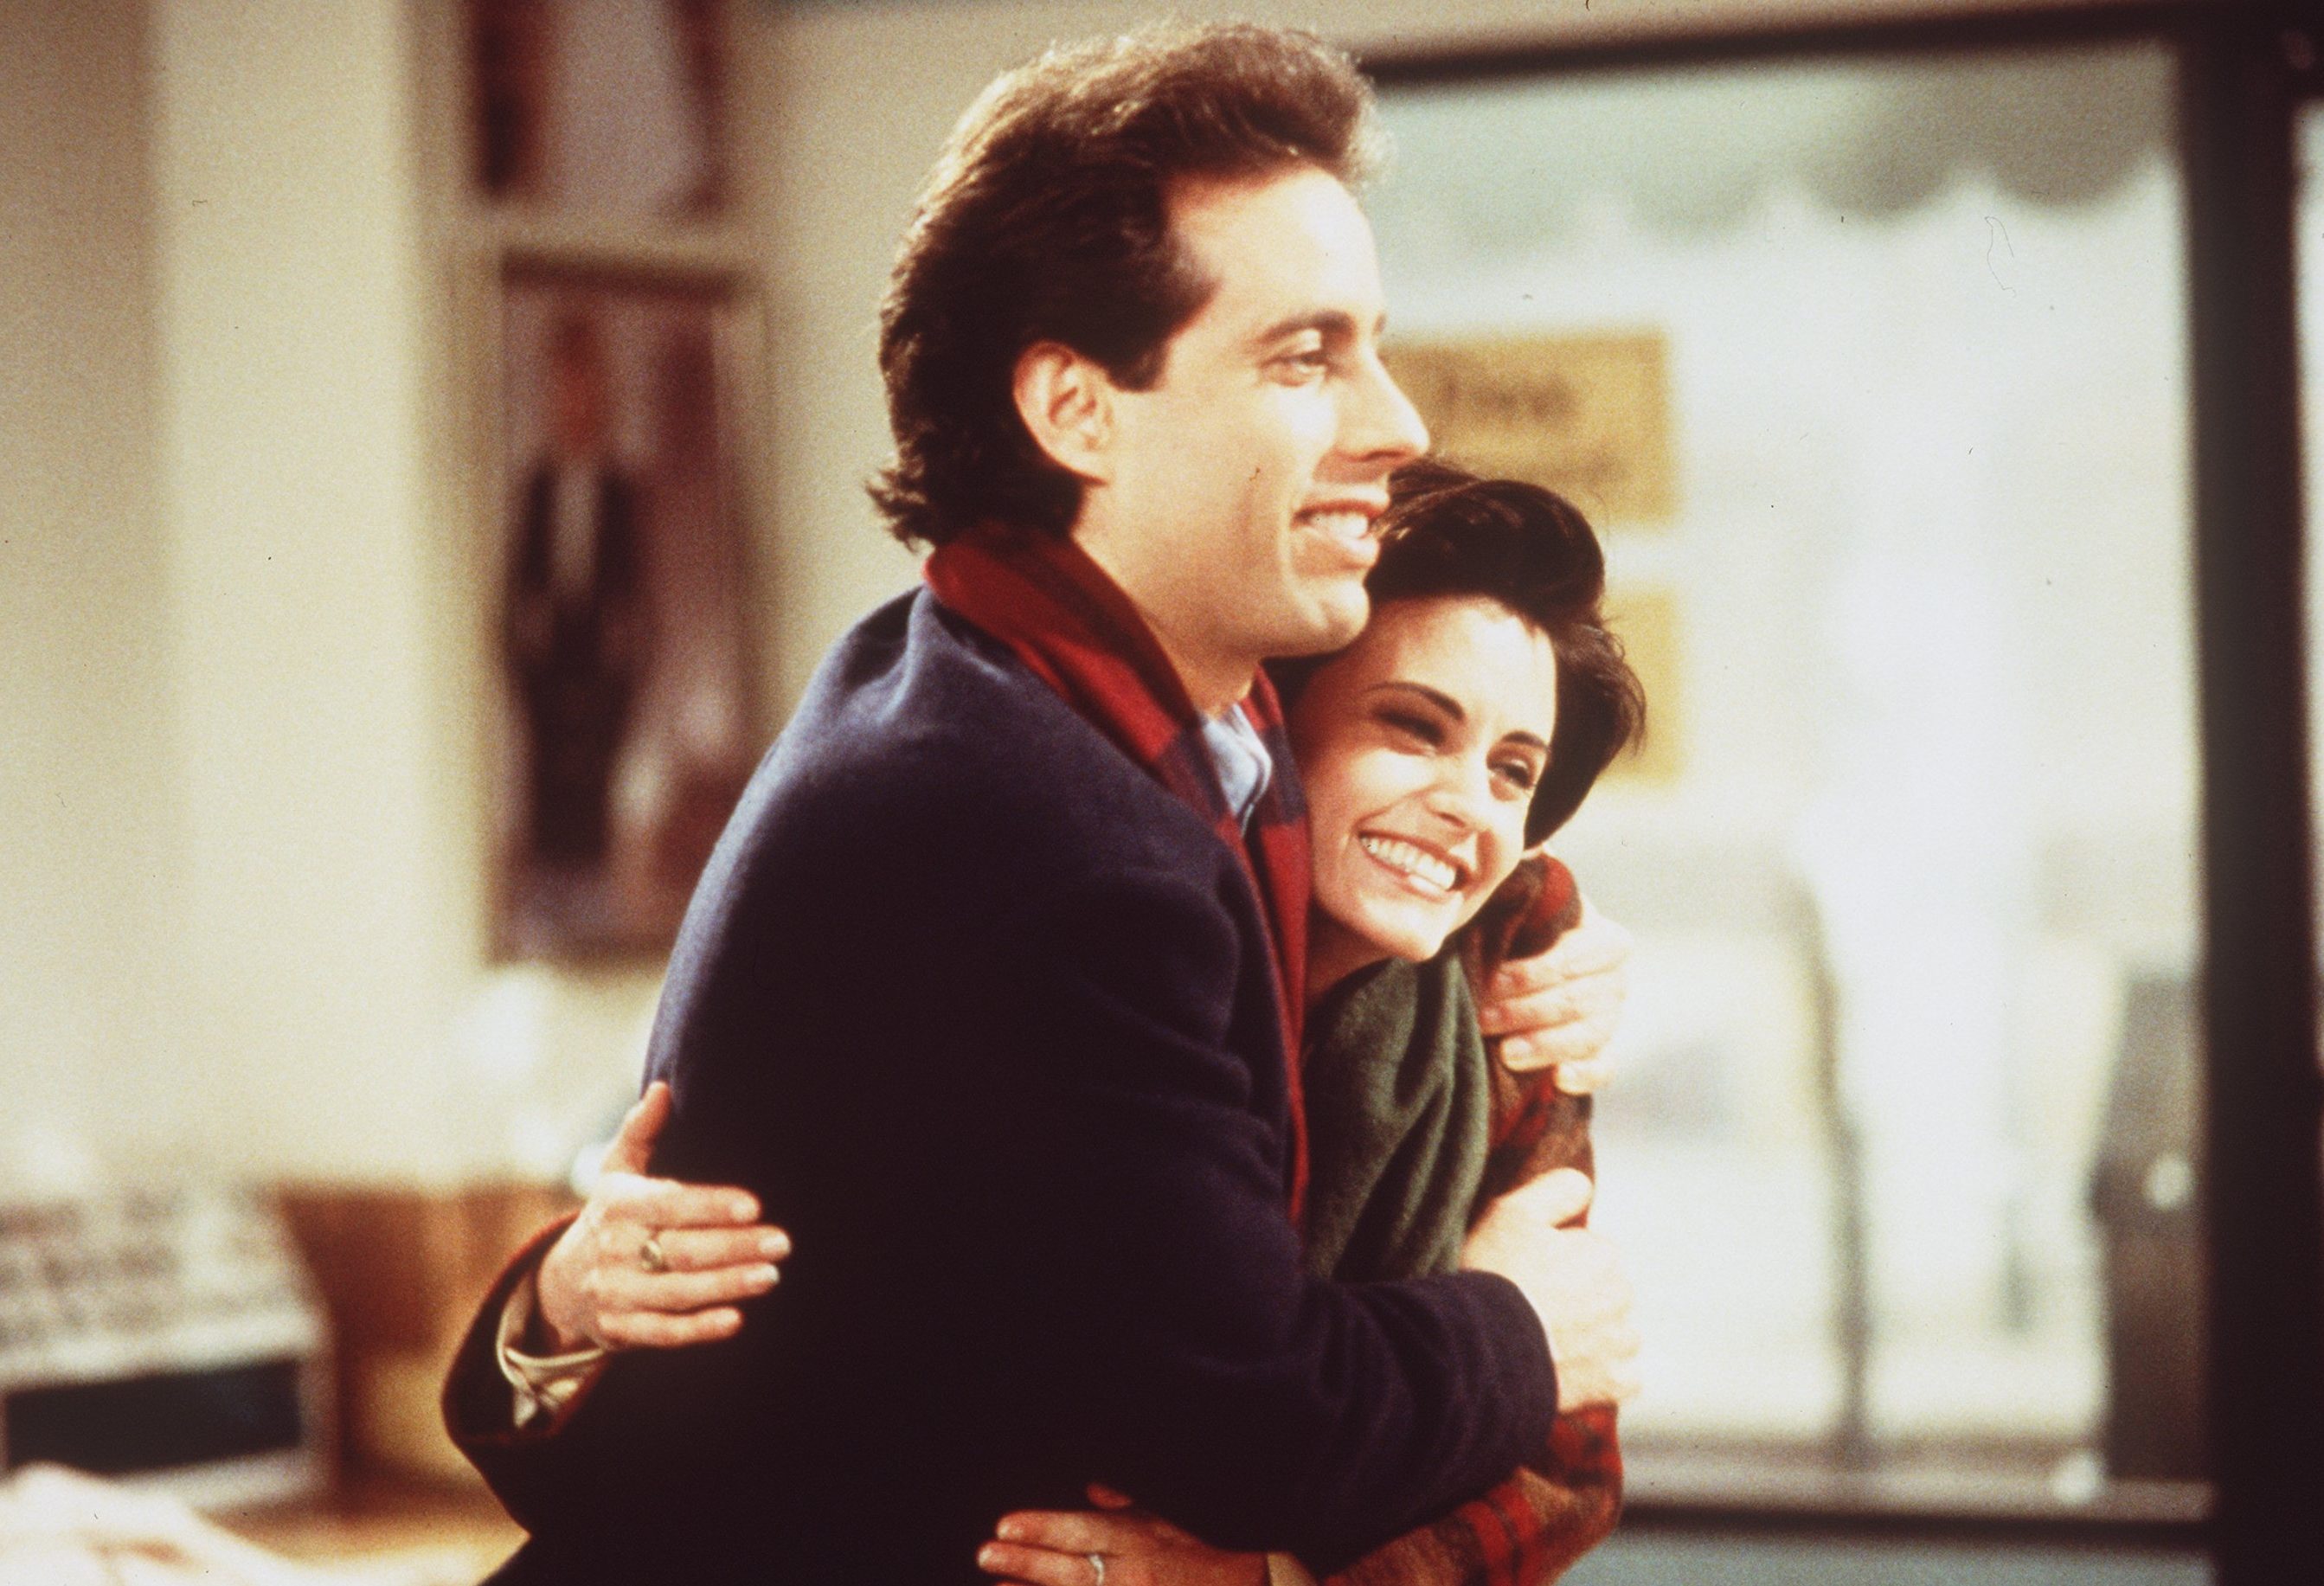 Seinfeld's Girlfriends- Episode #04-0517 - "The Wife" Special Guest: Courteney Cox 1997 Castle Rock Entertainment (Photo By Getty Images)